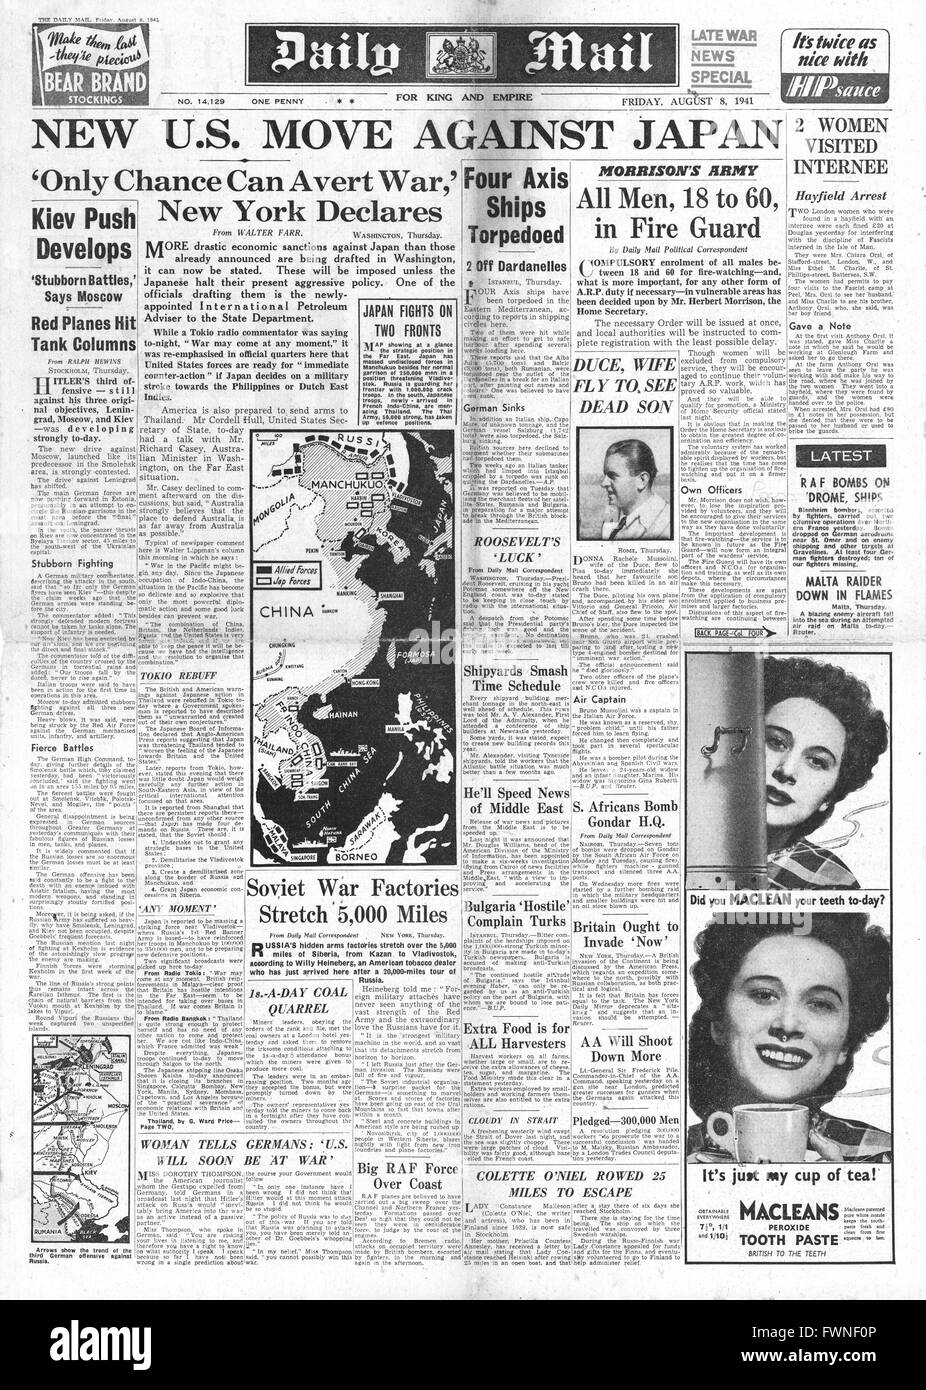 1941 front page  Daily Mail U.S. Economic sanctions against Japan and Herbert Morrison, Home Secretary enrolls all men between 18 and 60 in Fire Watching Stock Photo